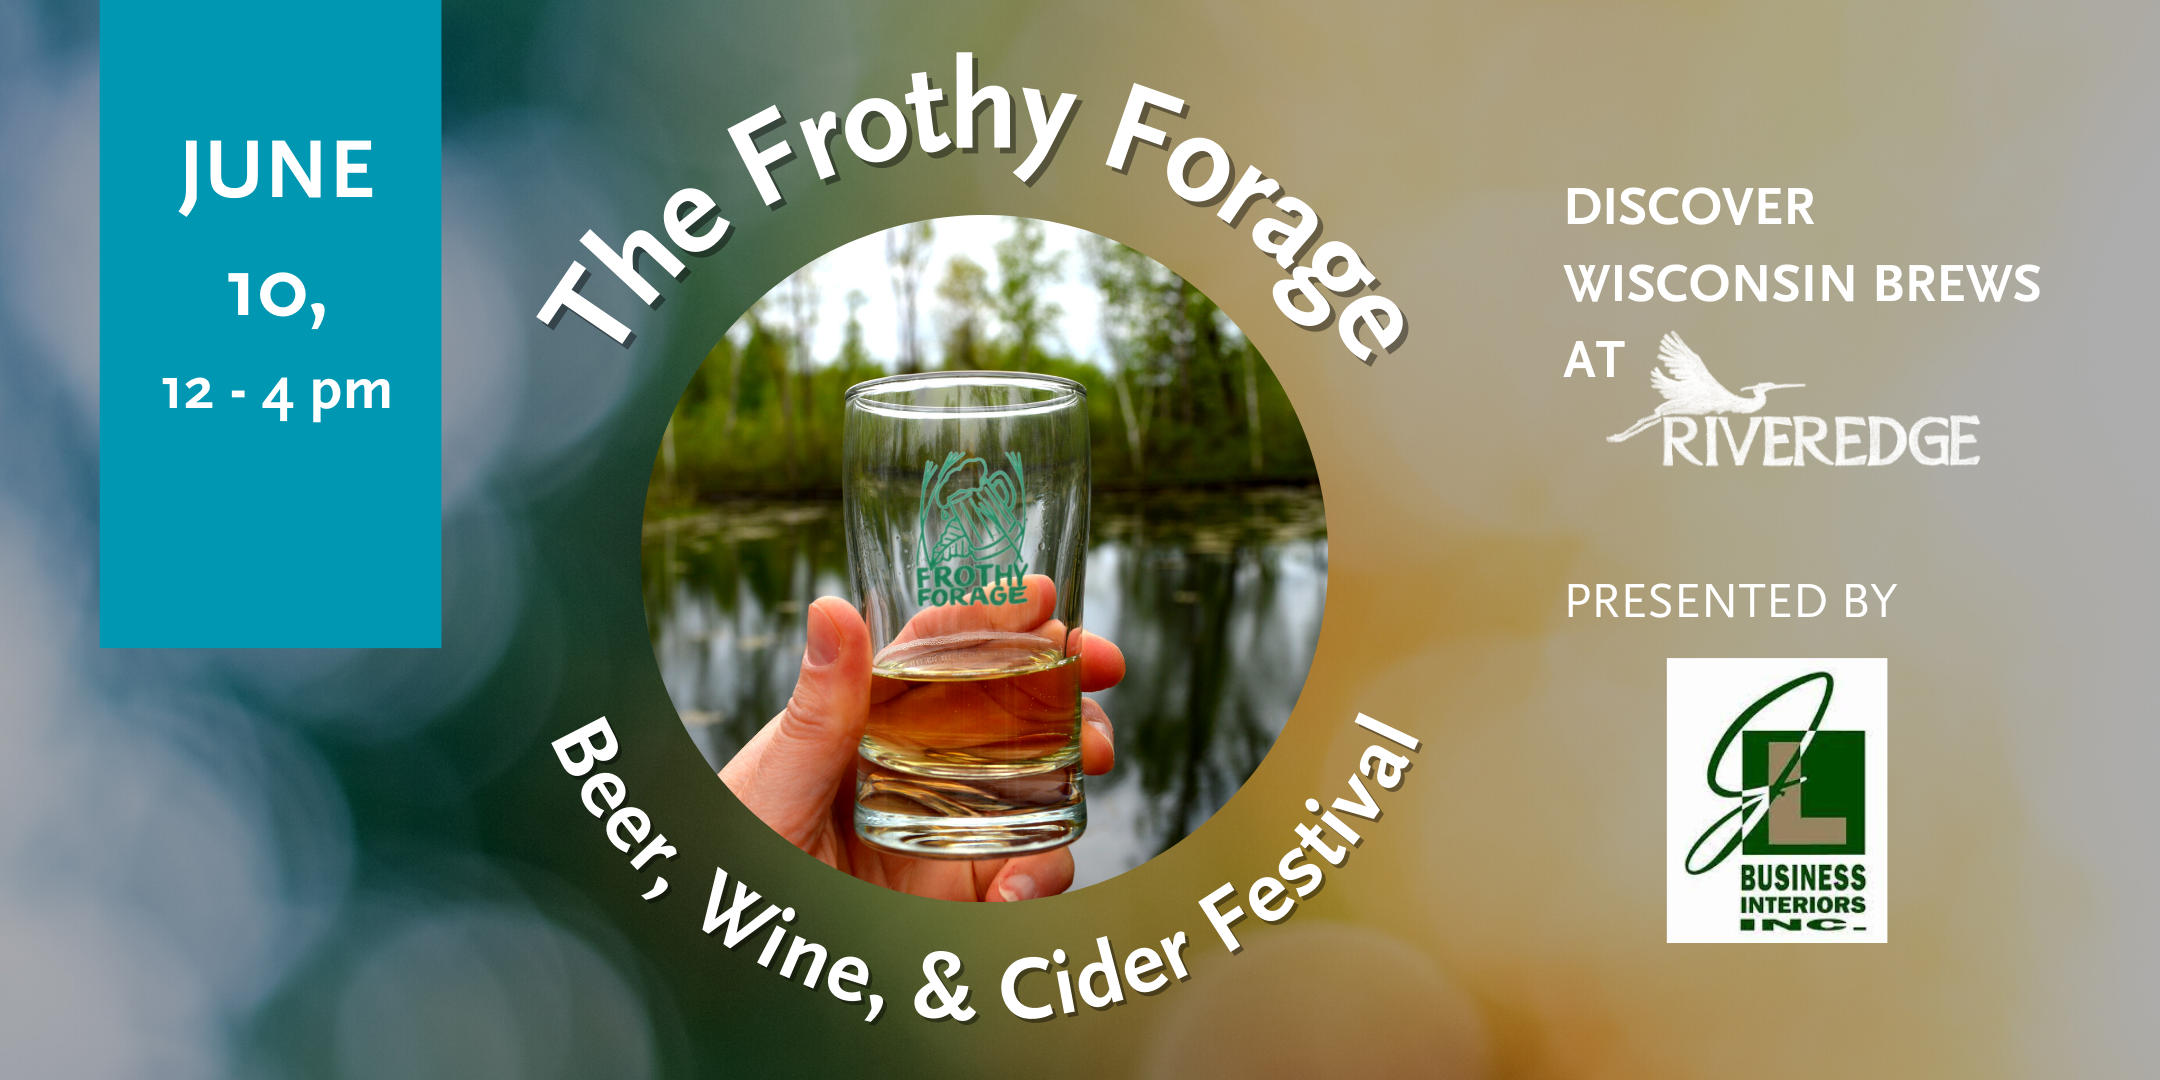 The Frothy Forage banner image